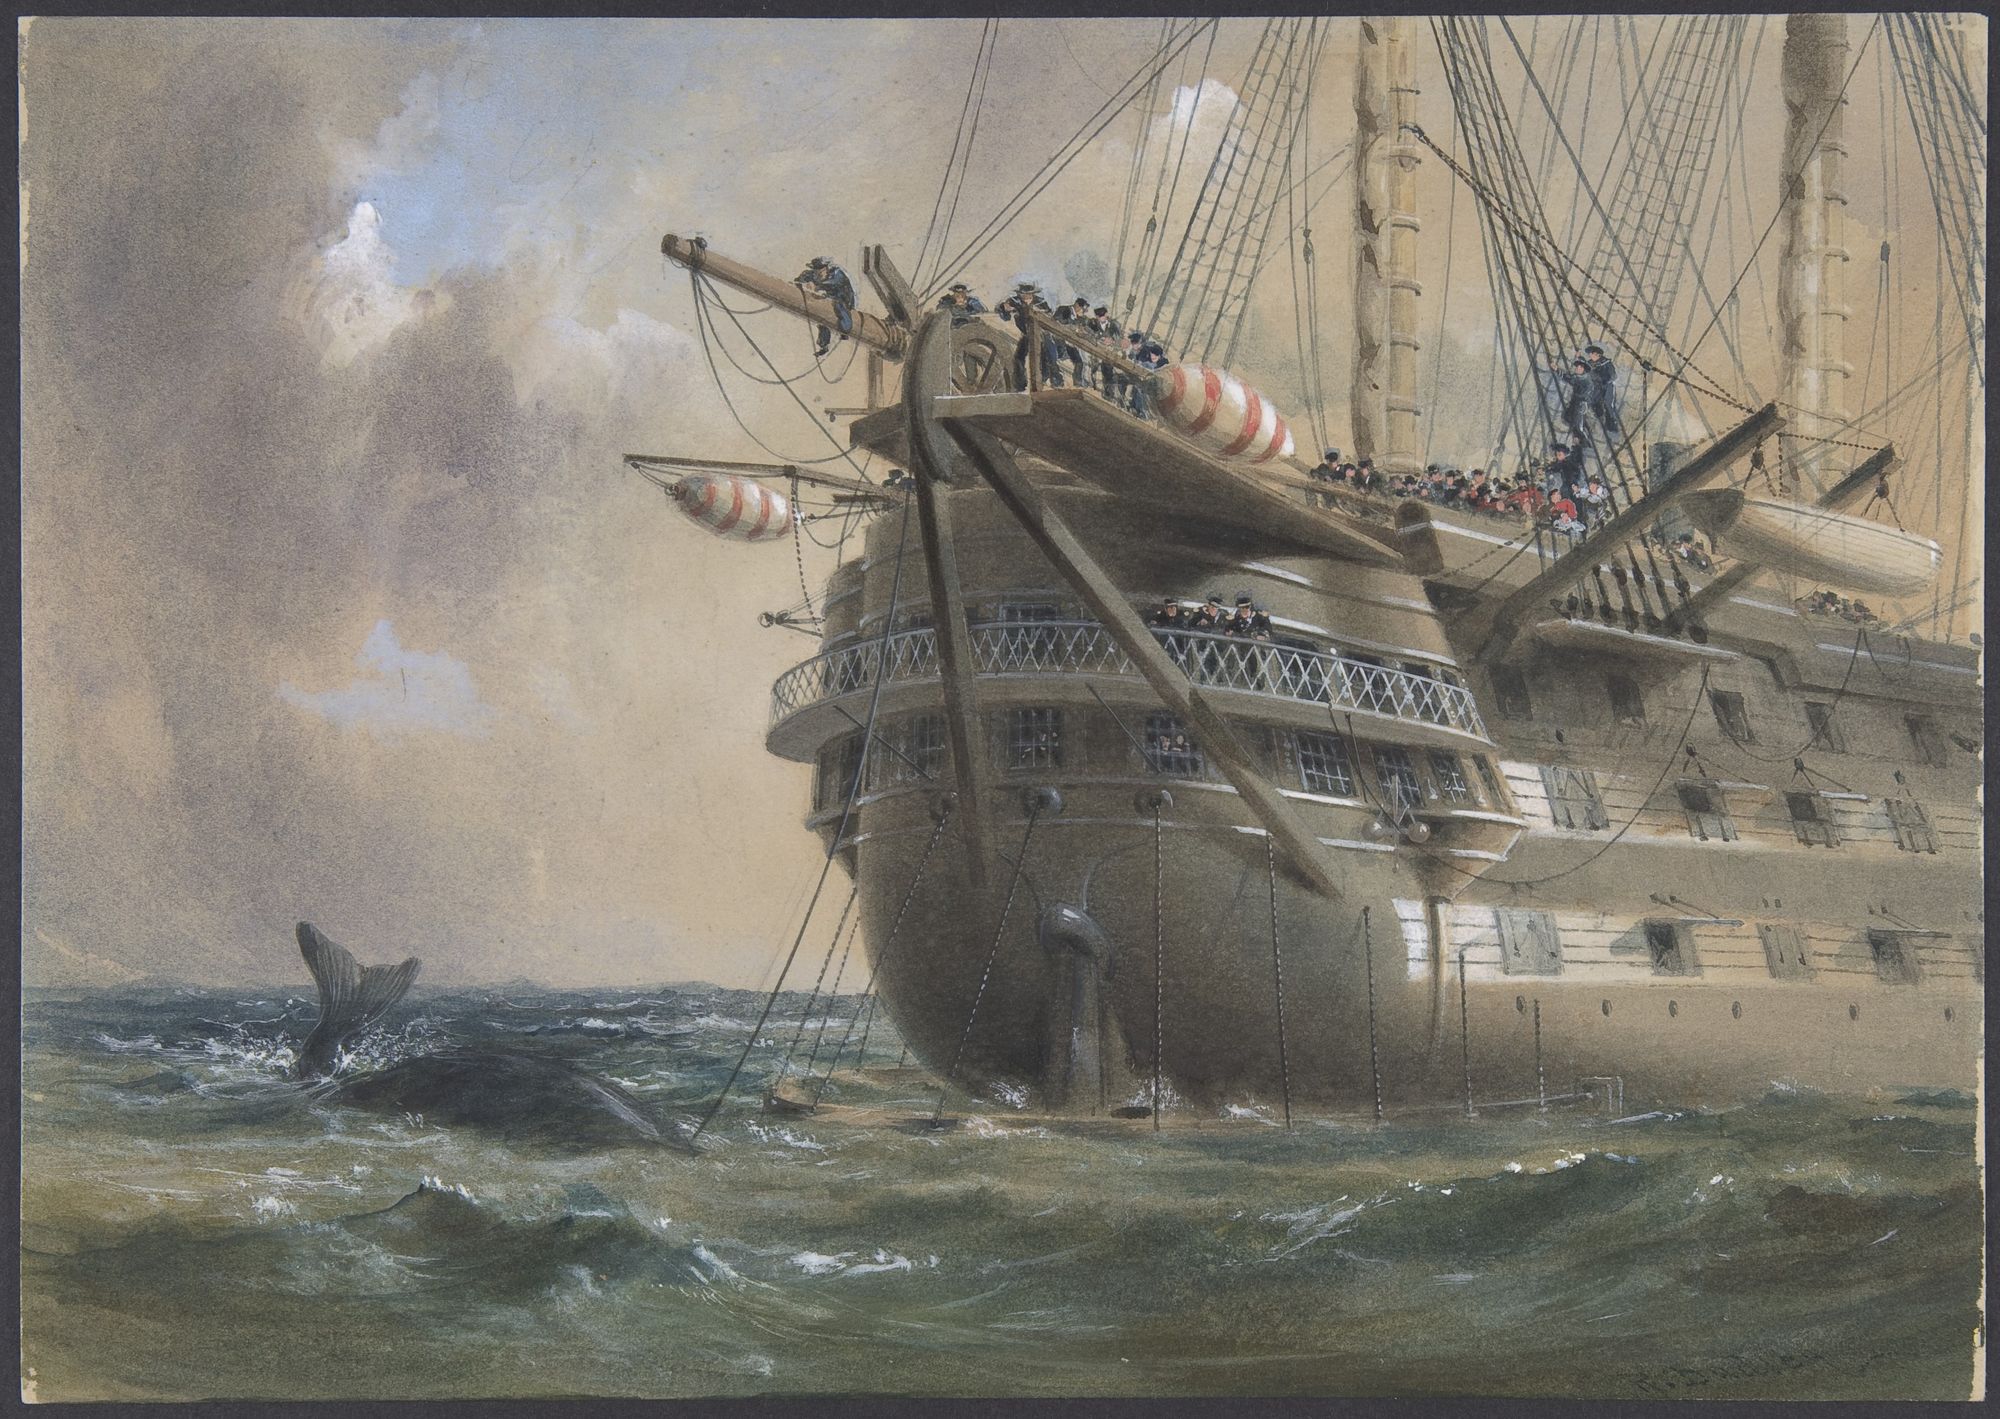 H.M.S._Agamemnon_Laying_the_Atlantic_Telegraph_Cable_in_1858-_a_Whale_Crosses_the_Line_MET_DP801262.jpg